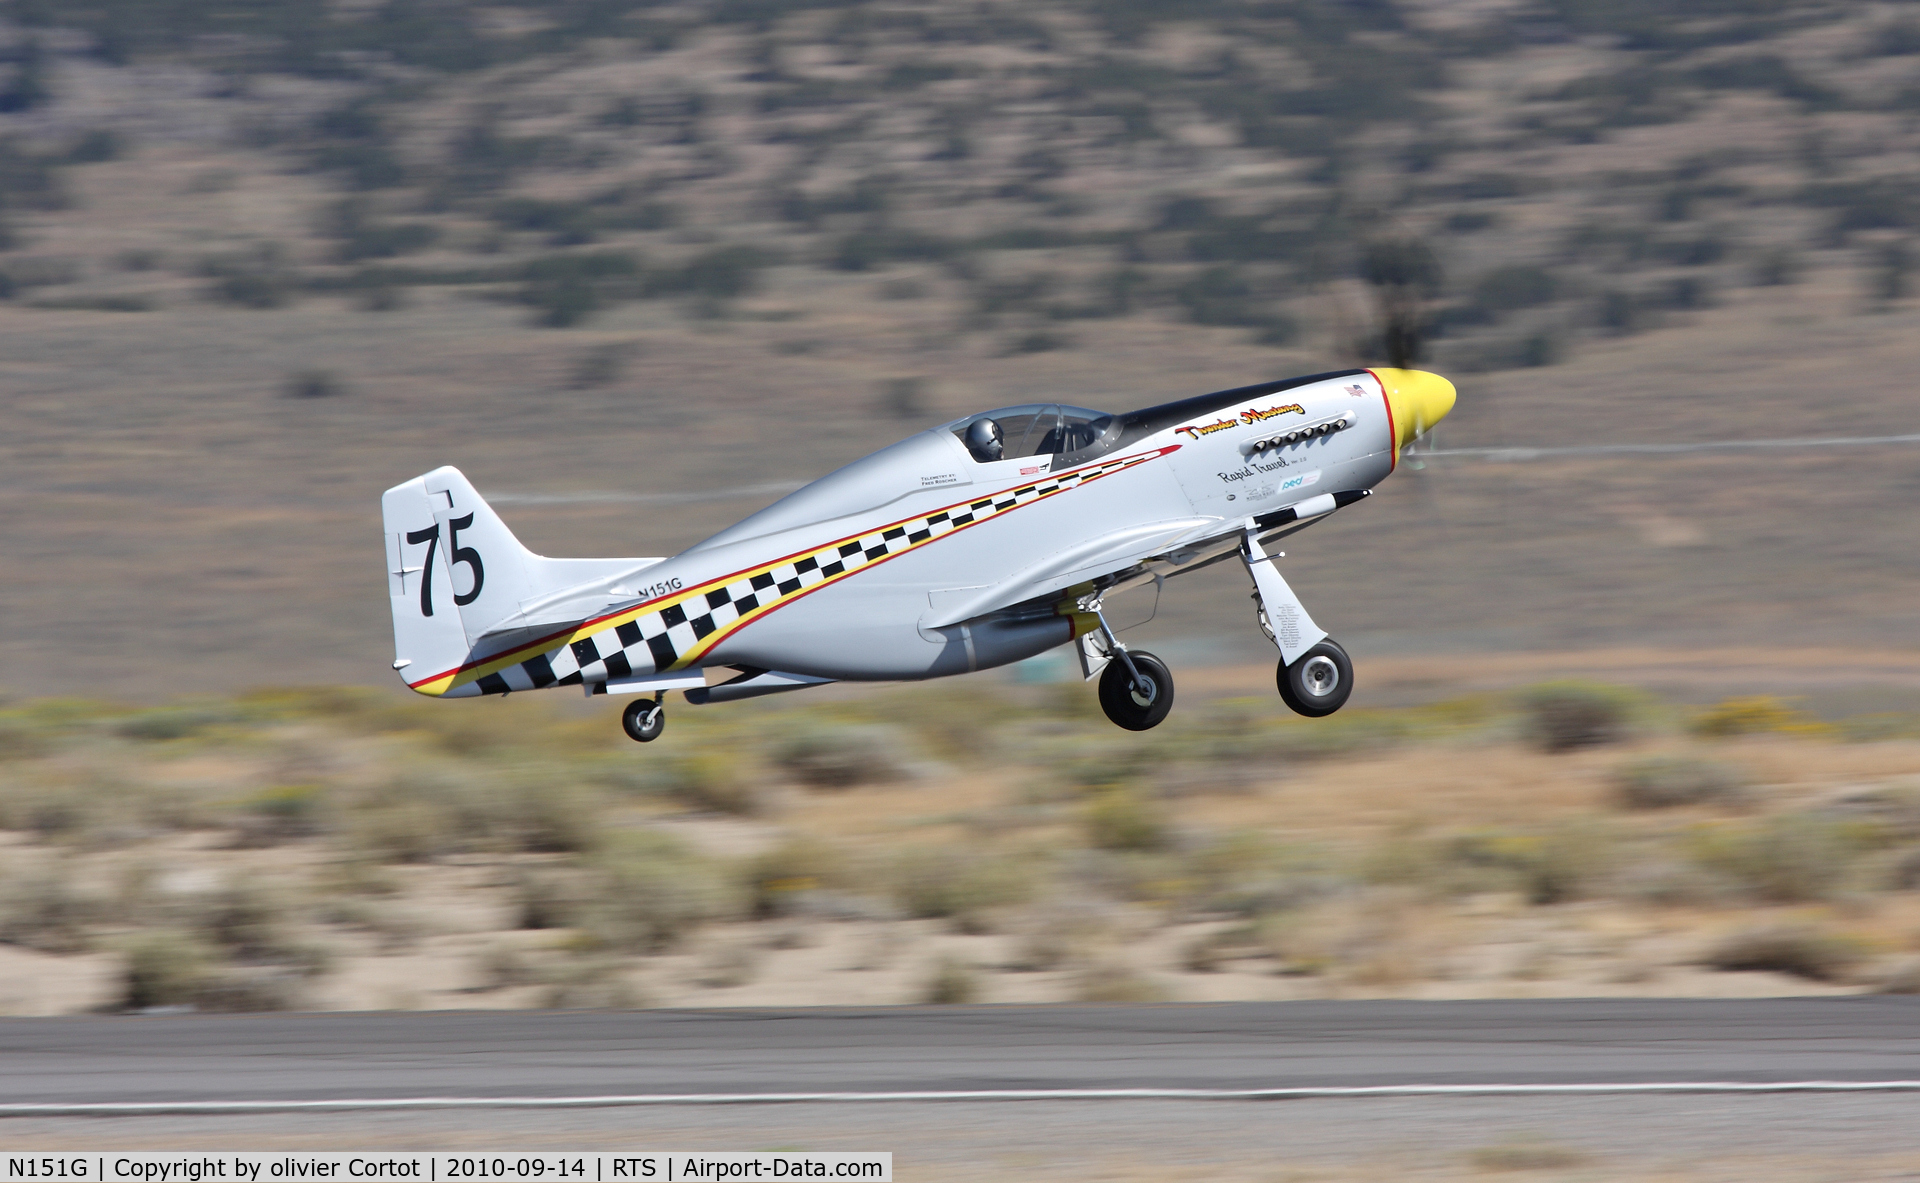 N151G, Papa 51 Thunder Mustang C/N FITM024, taking off during the 2010 reno air races